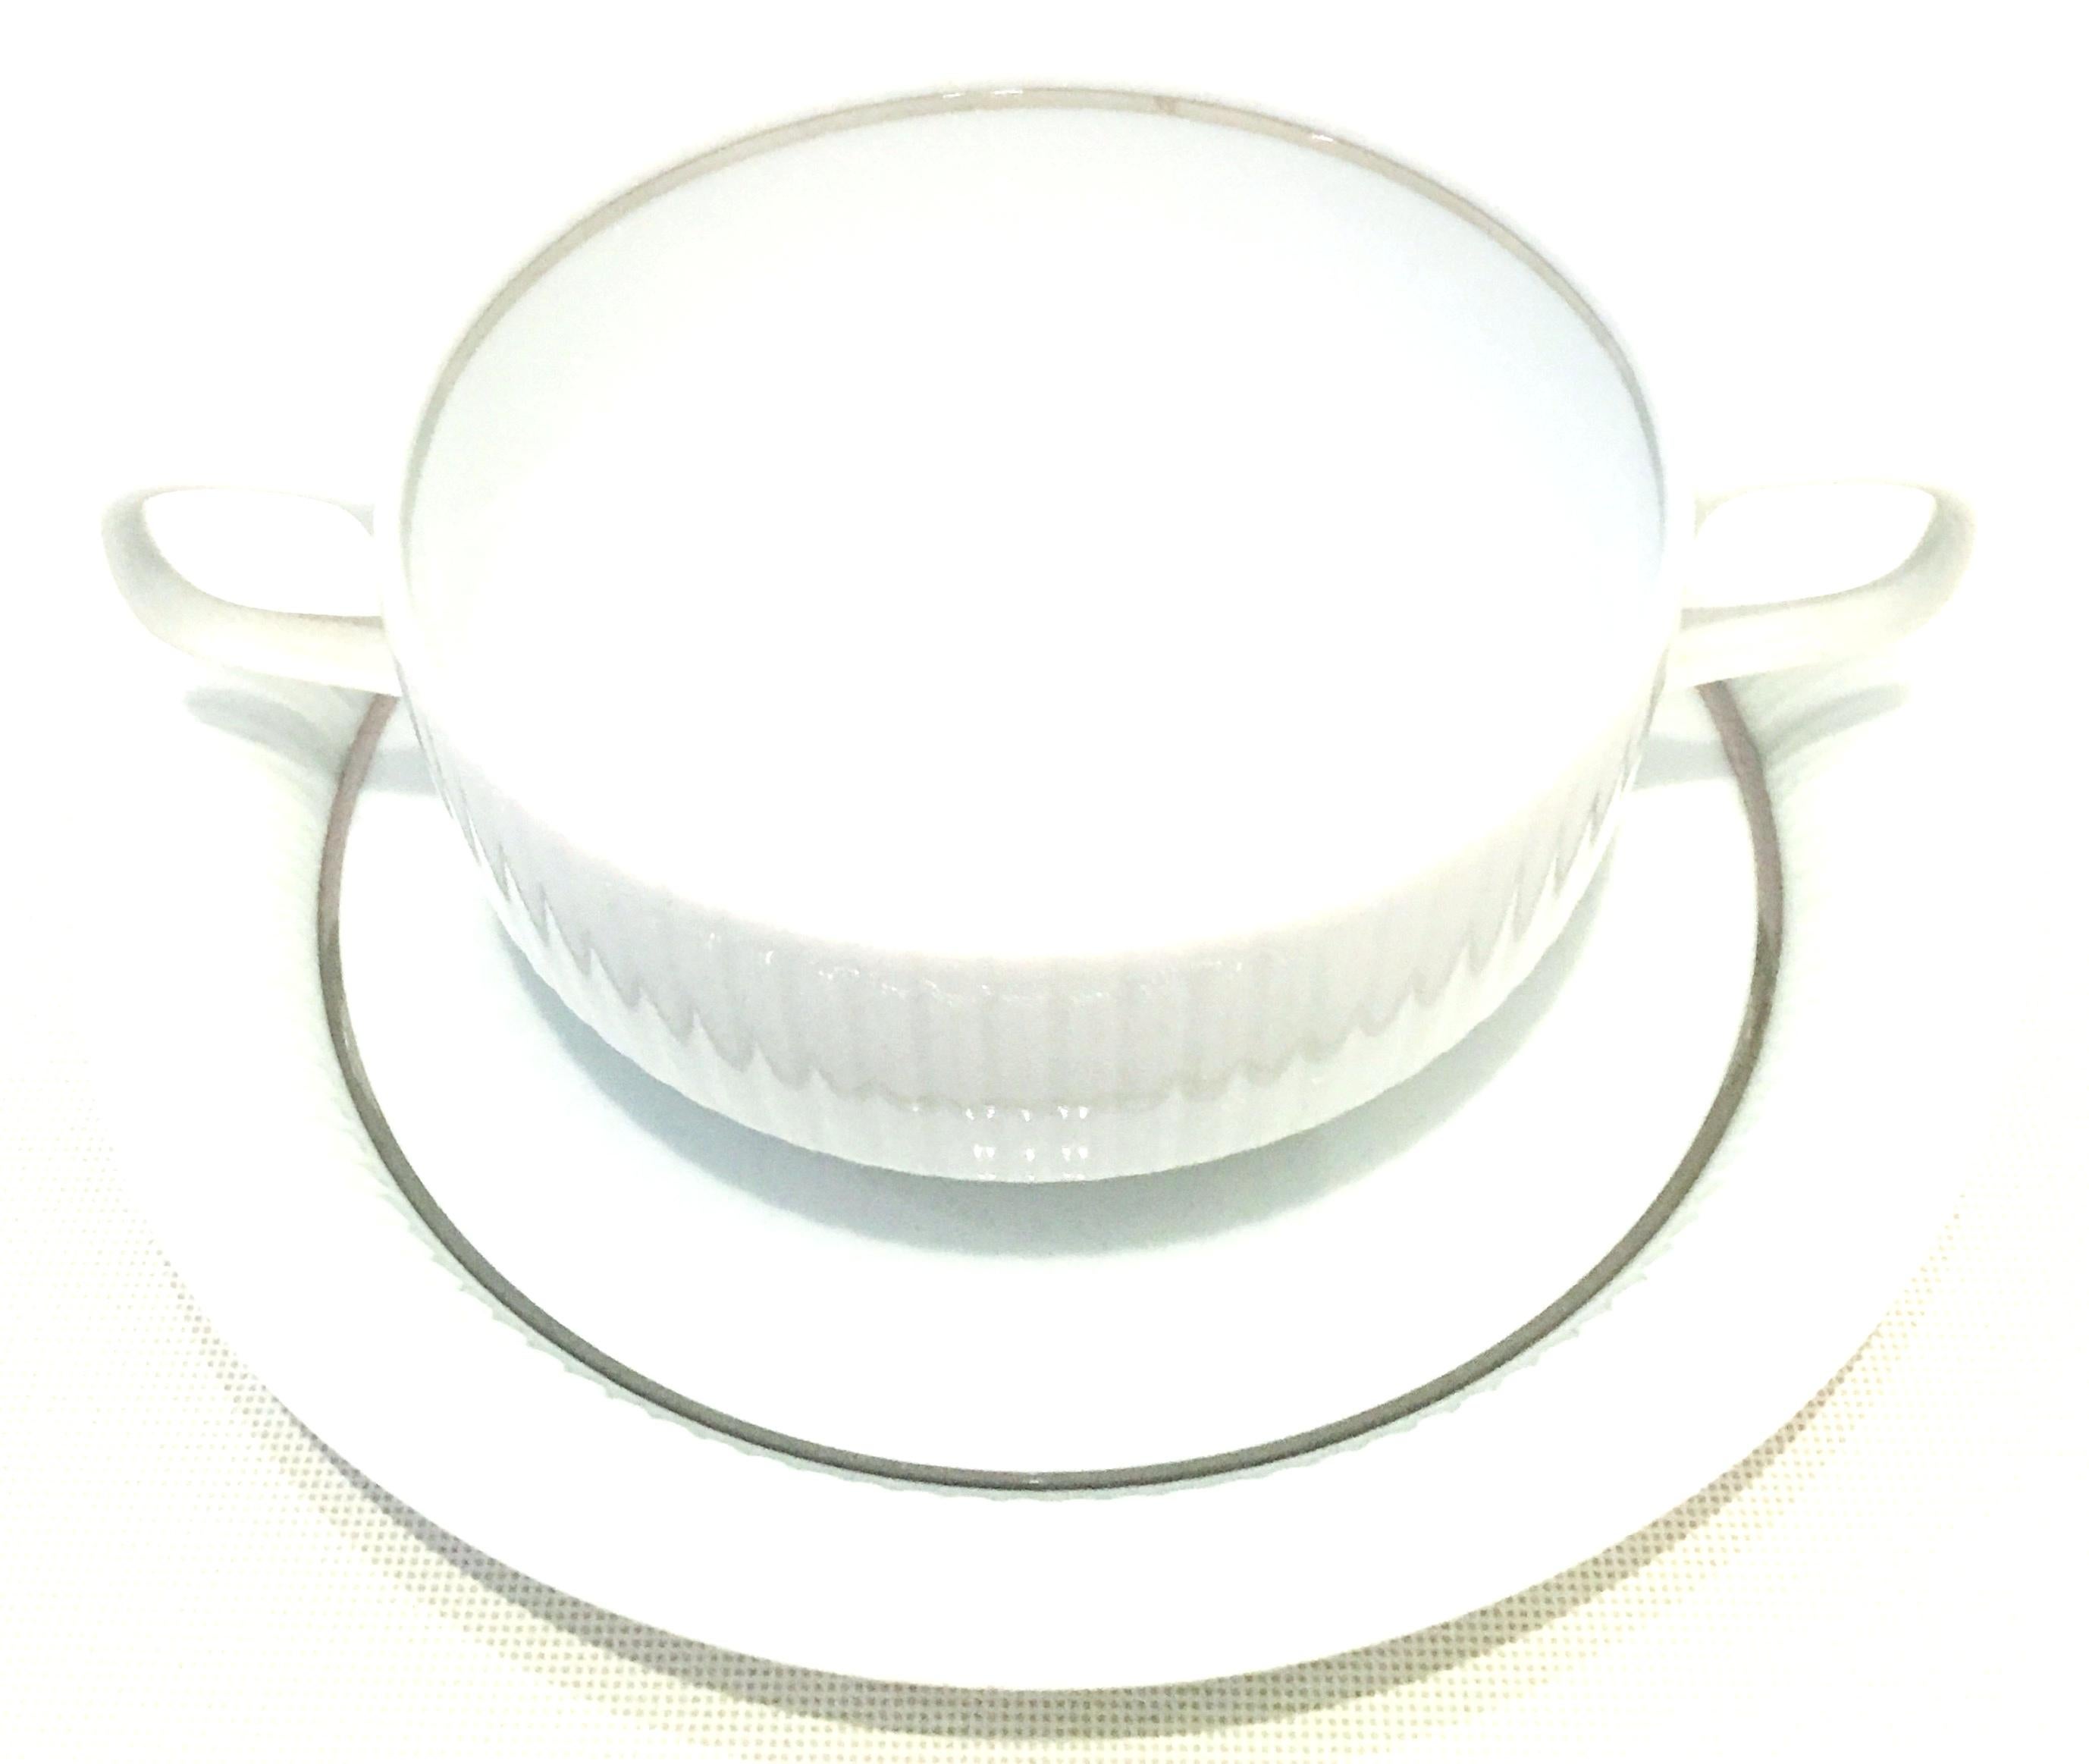 Modern 20th Century German Porcelain Cream Soup Cup and Saucer Set of 8 by Rosenthal For Sale